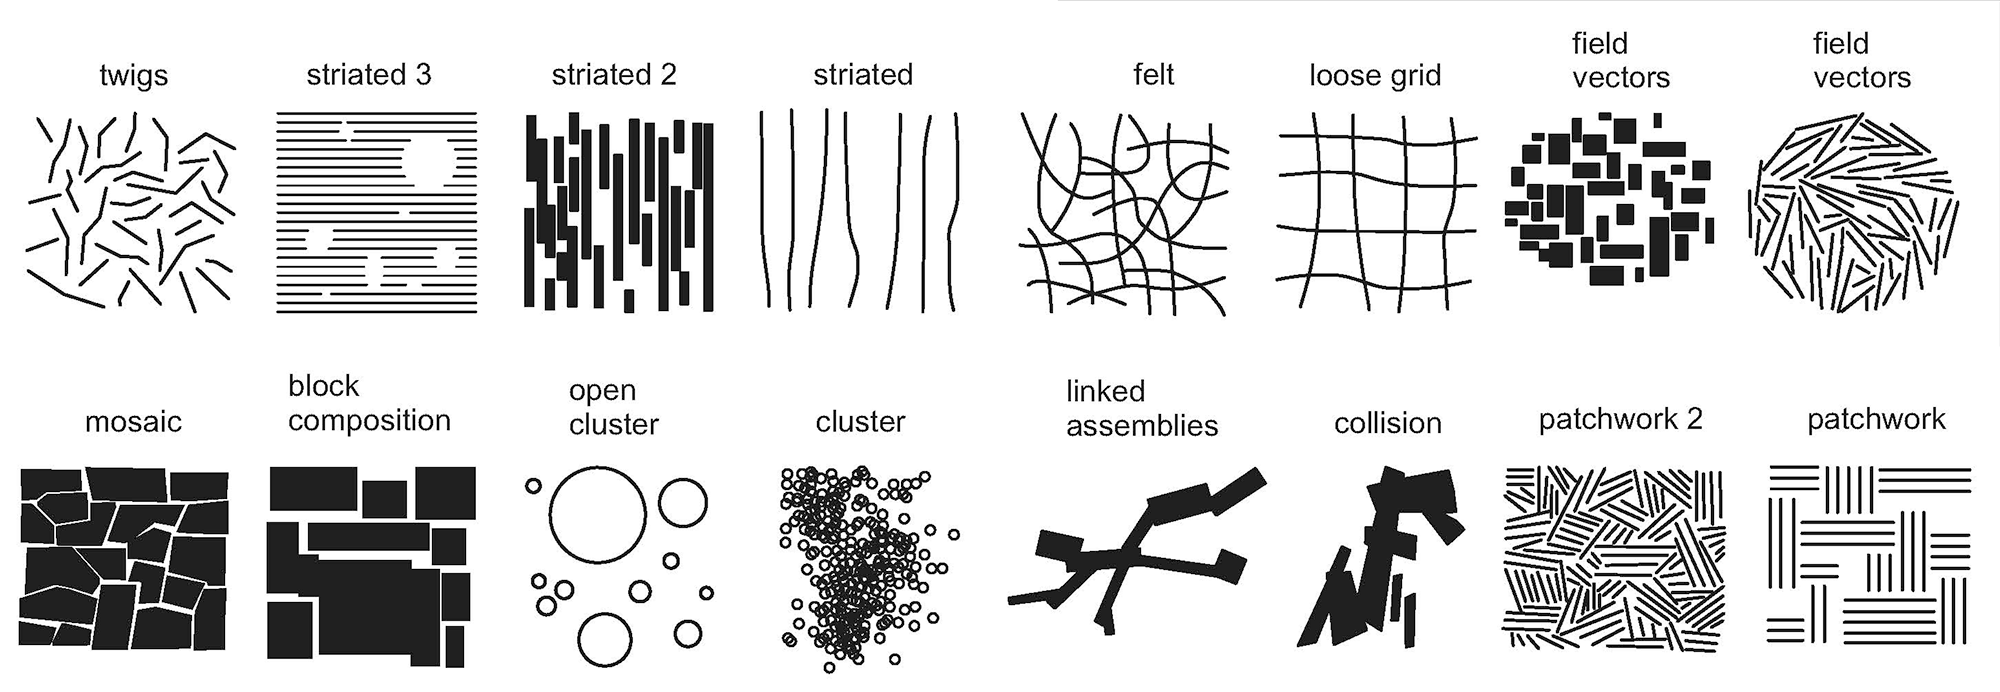 Diagram of various field compositions.